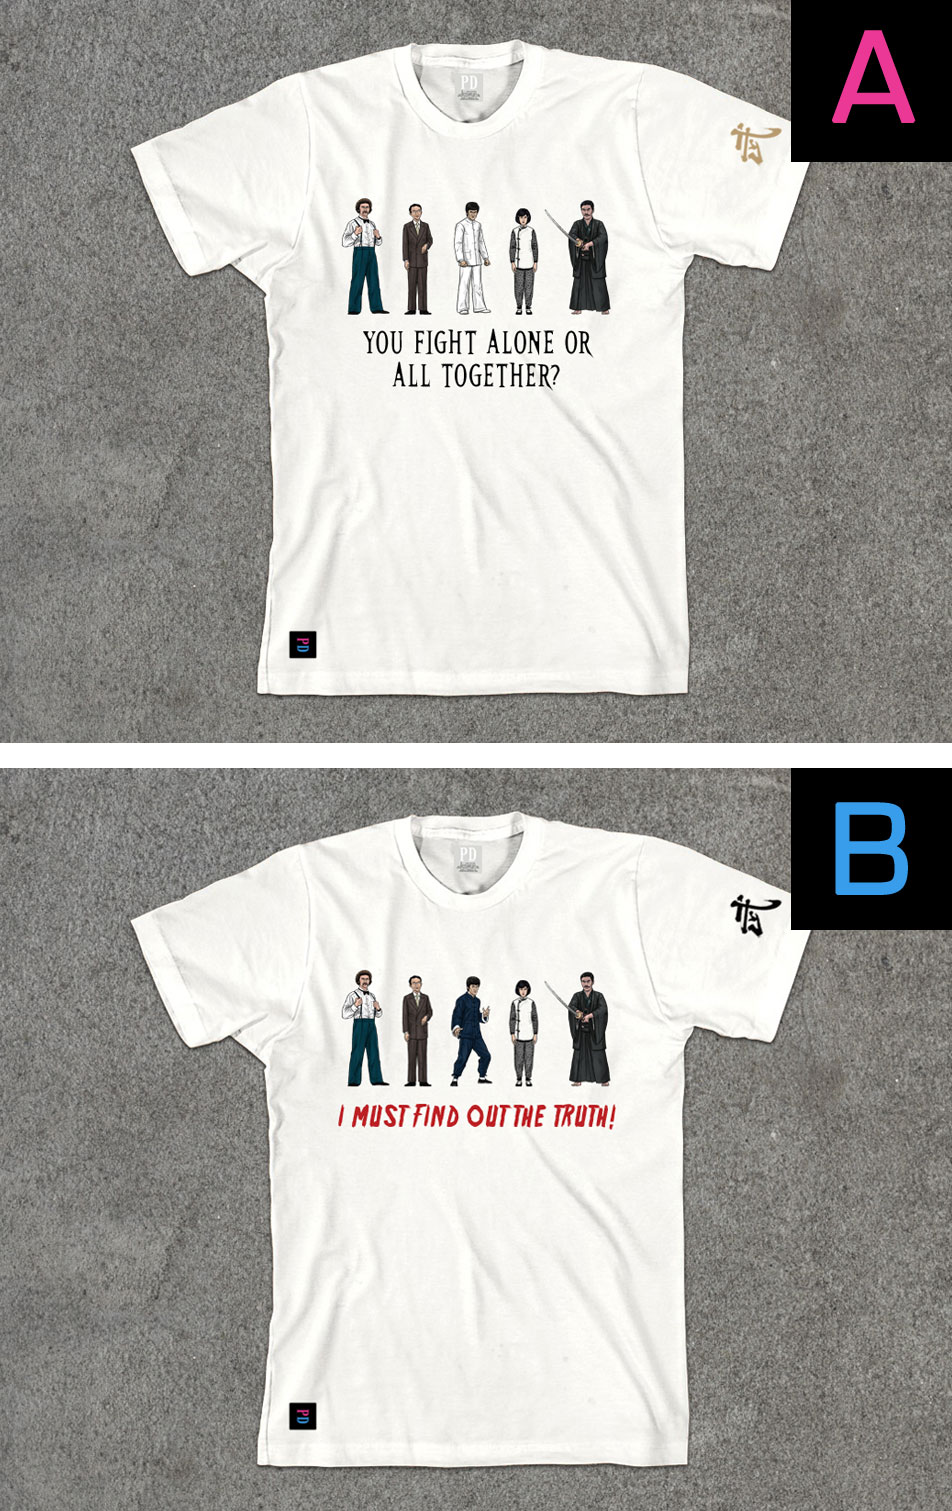 Furious Connection T-Shirt designs by Marten Go aka MGO